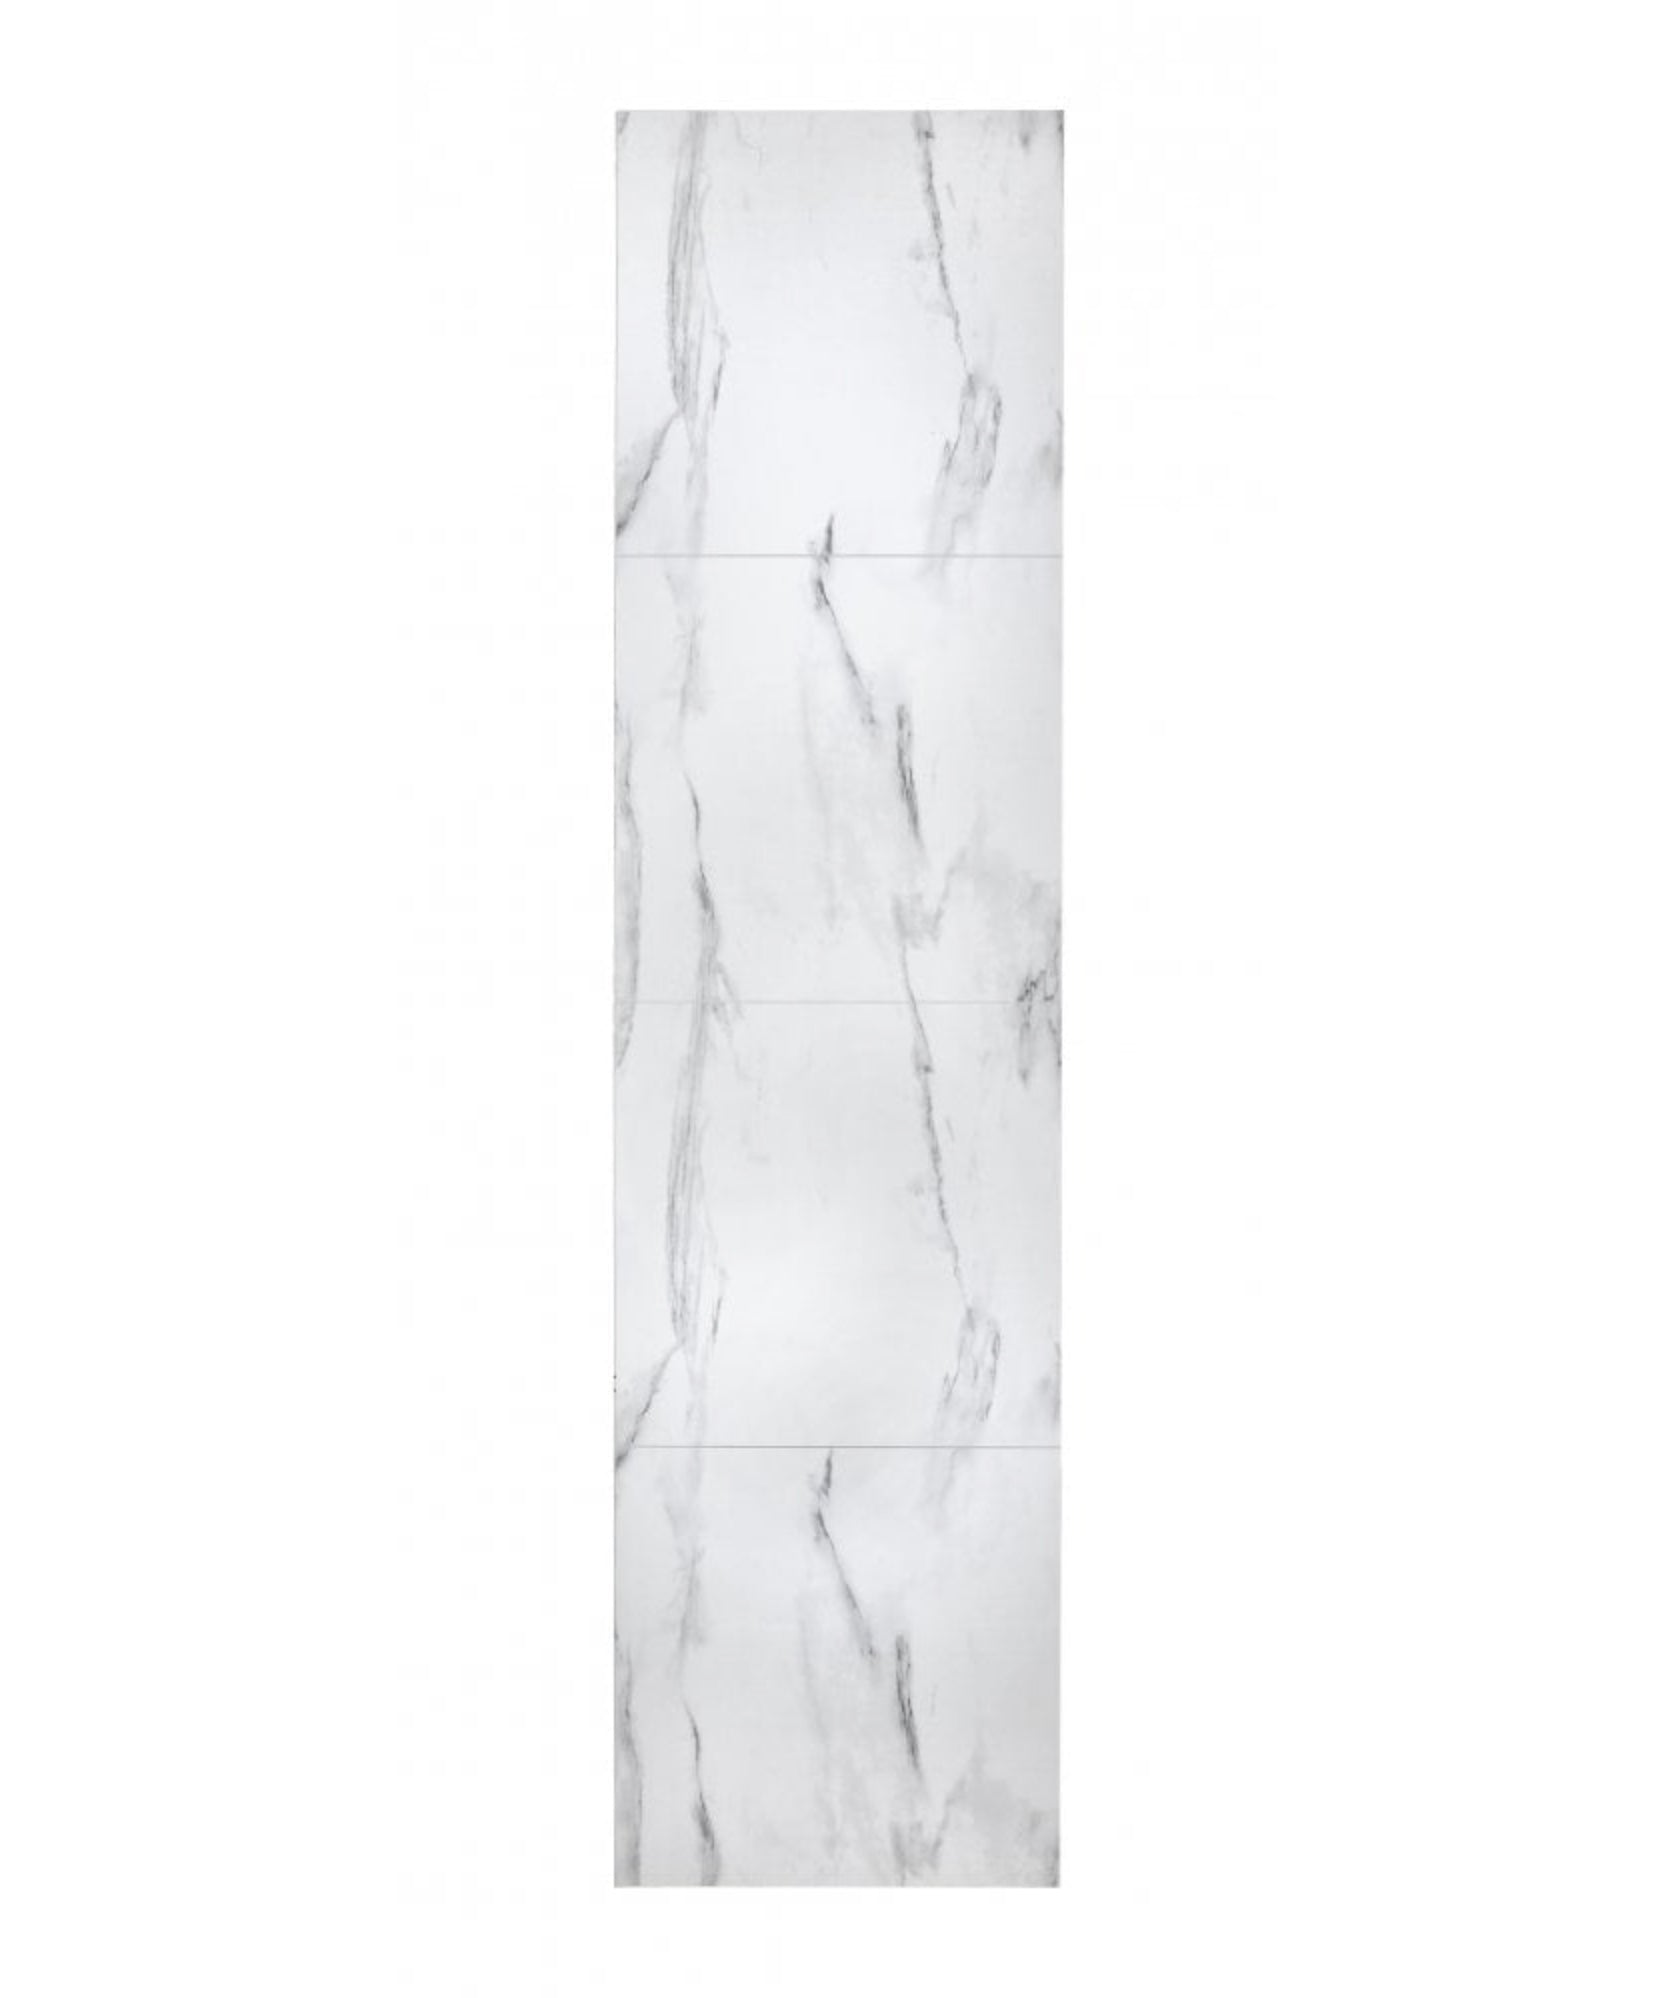 BerryAlloc Wall & Water Collection - White Marble Satin